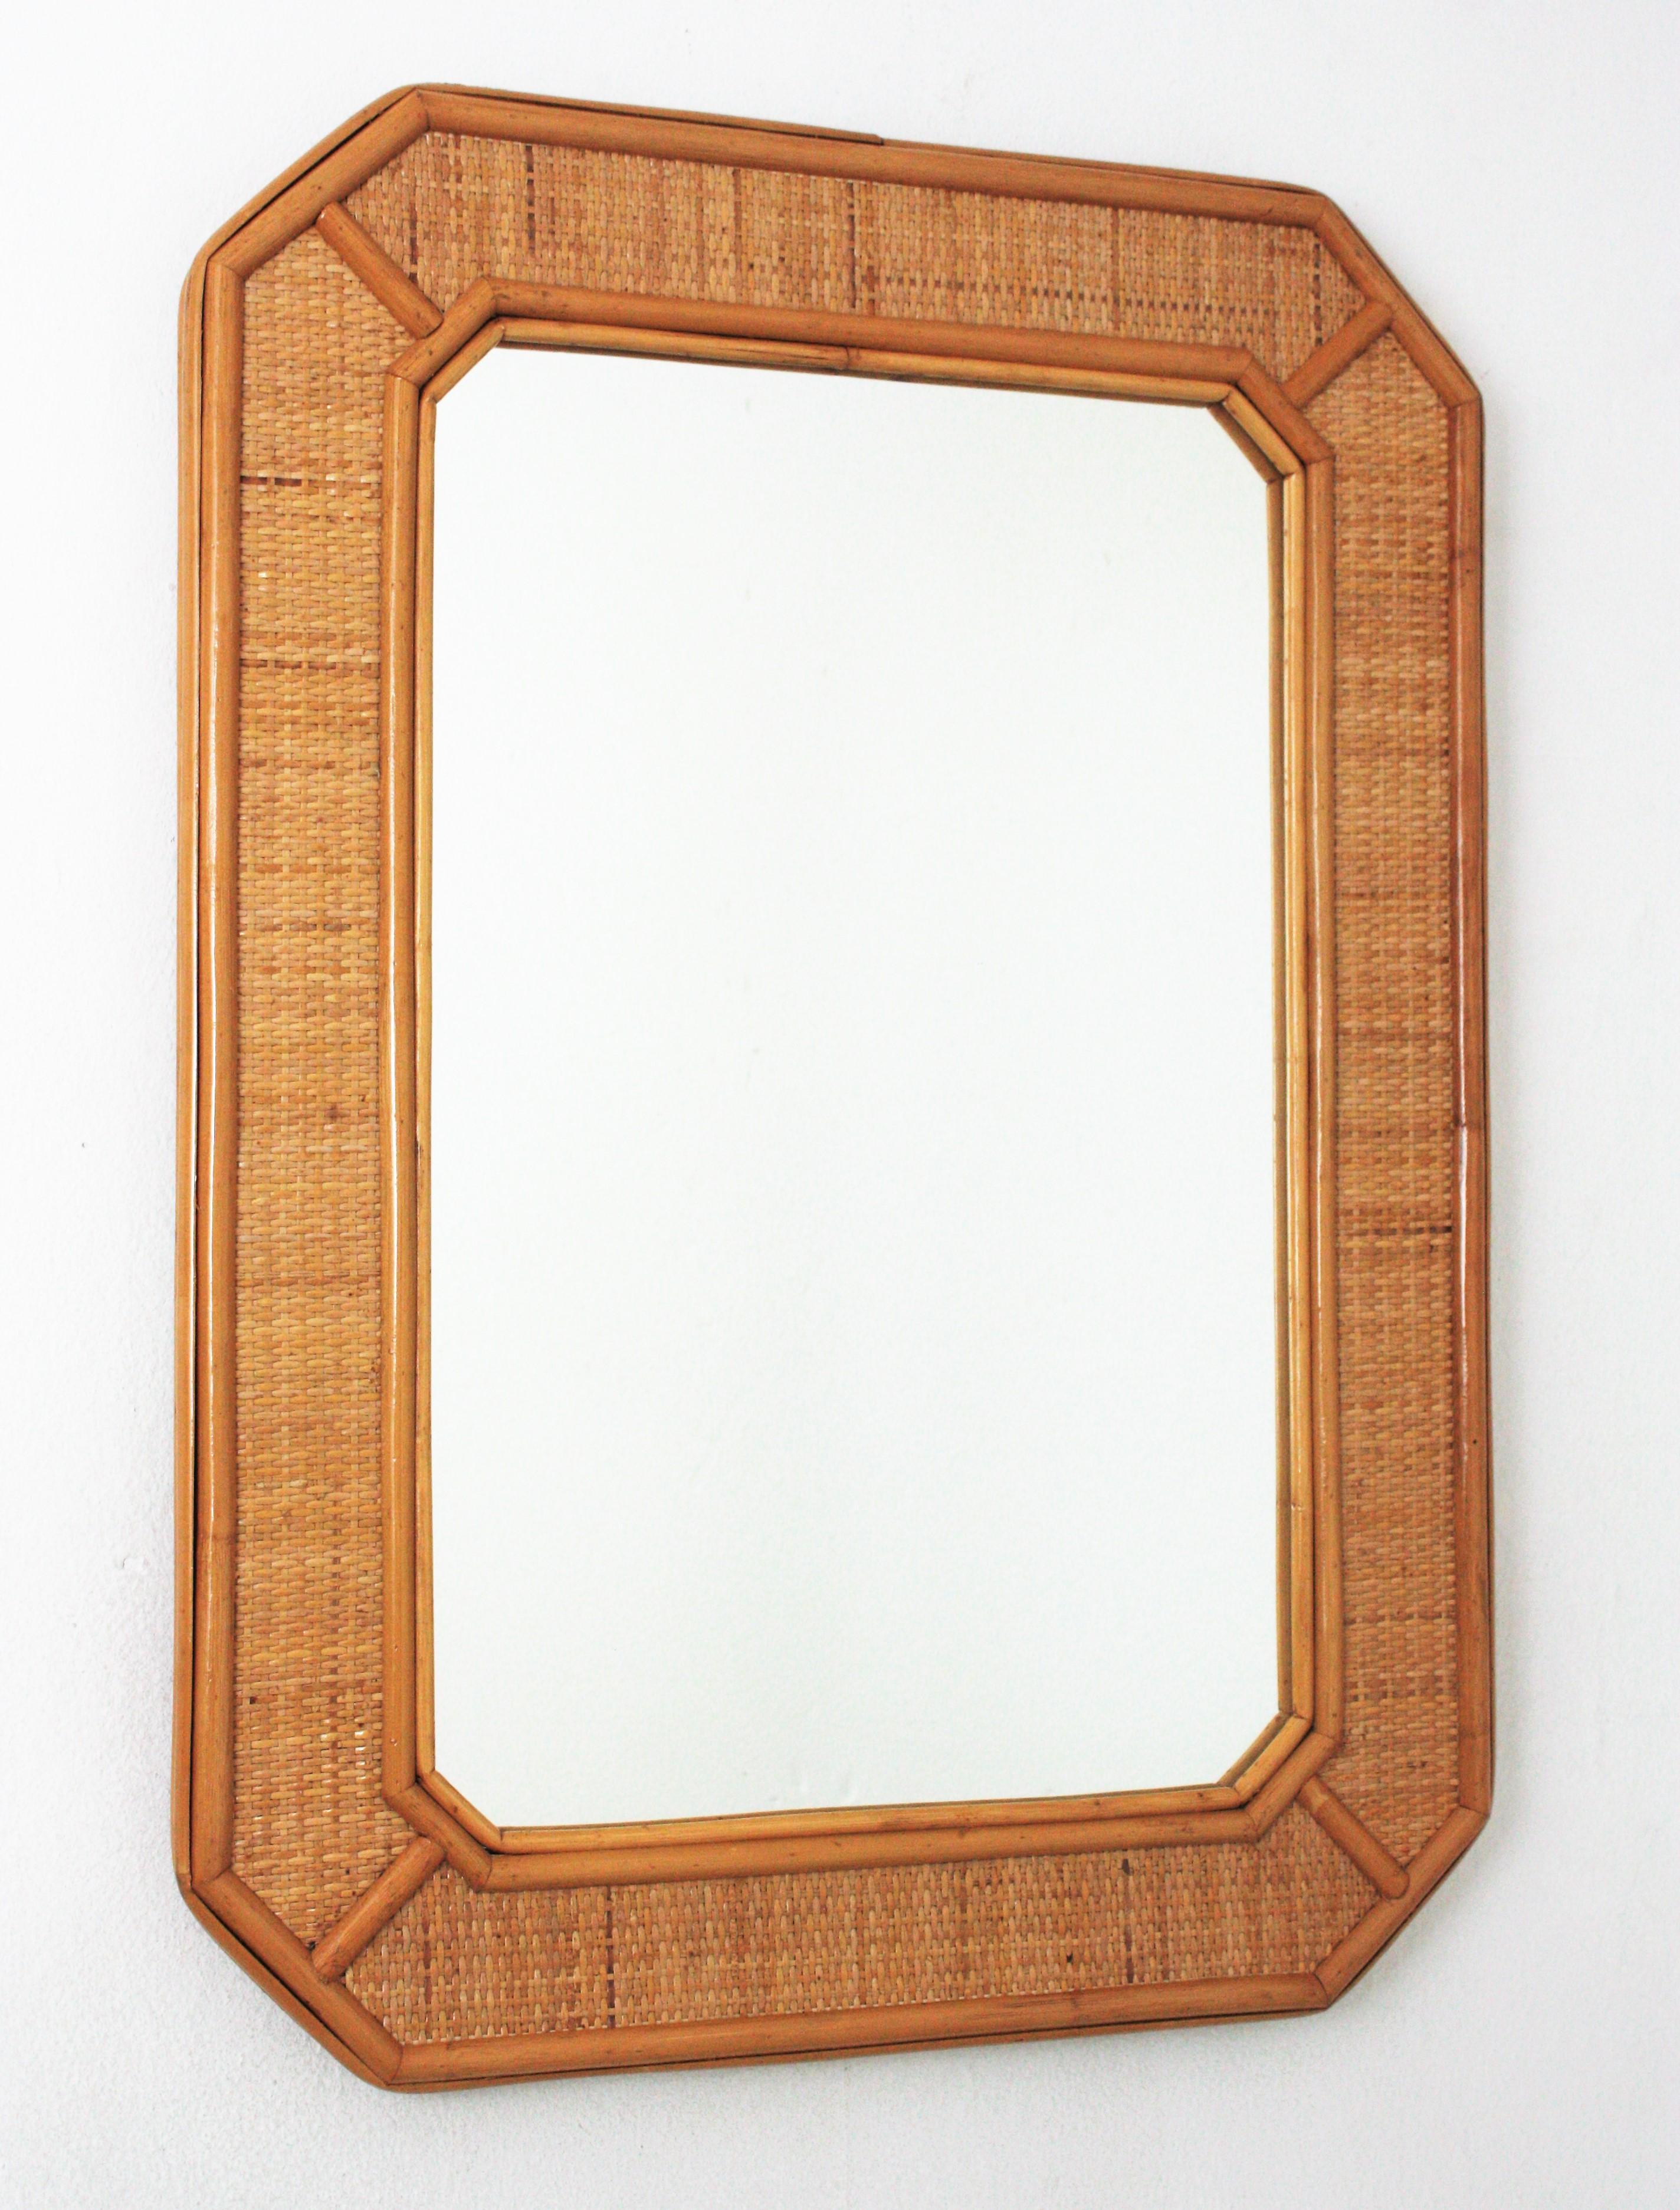 Large Octagonal mirror in Rattan and Wicker, Italy, 1960-1970.
Elegant mid-20th century woven wicker, bamboo rattan frame with chamfered corners. It has reminiscences of the designs by Gabriella Crespi and Christian Dior Home collection.
This